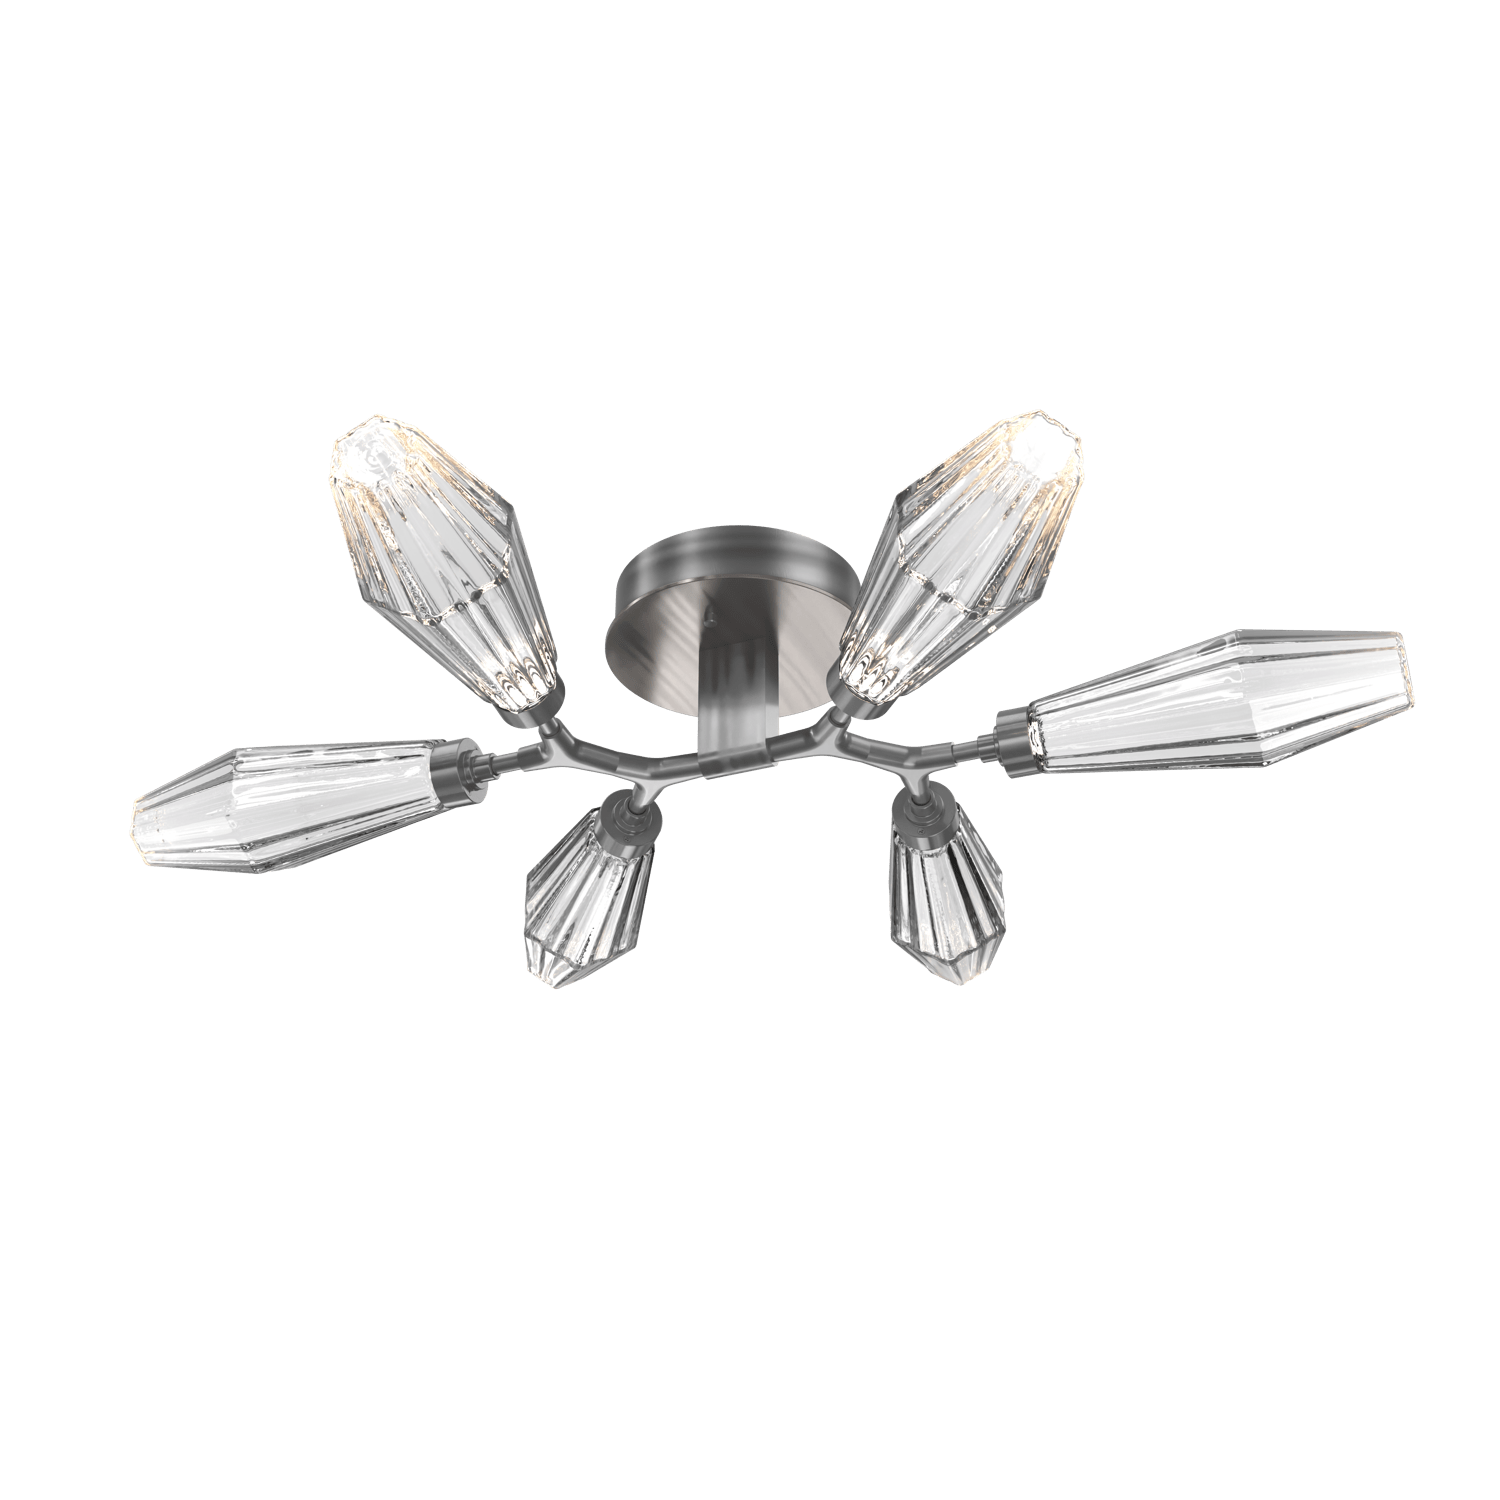 CLB0049-01-GM-RC-Hammerton-Studio-Aalto-6-light-organic-flush-mount-light-with-gunmetal-finish-and-optic-ribbed-clear-glass-shades-and-LED-lamping